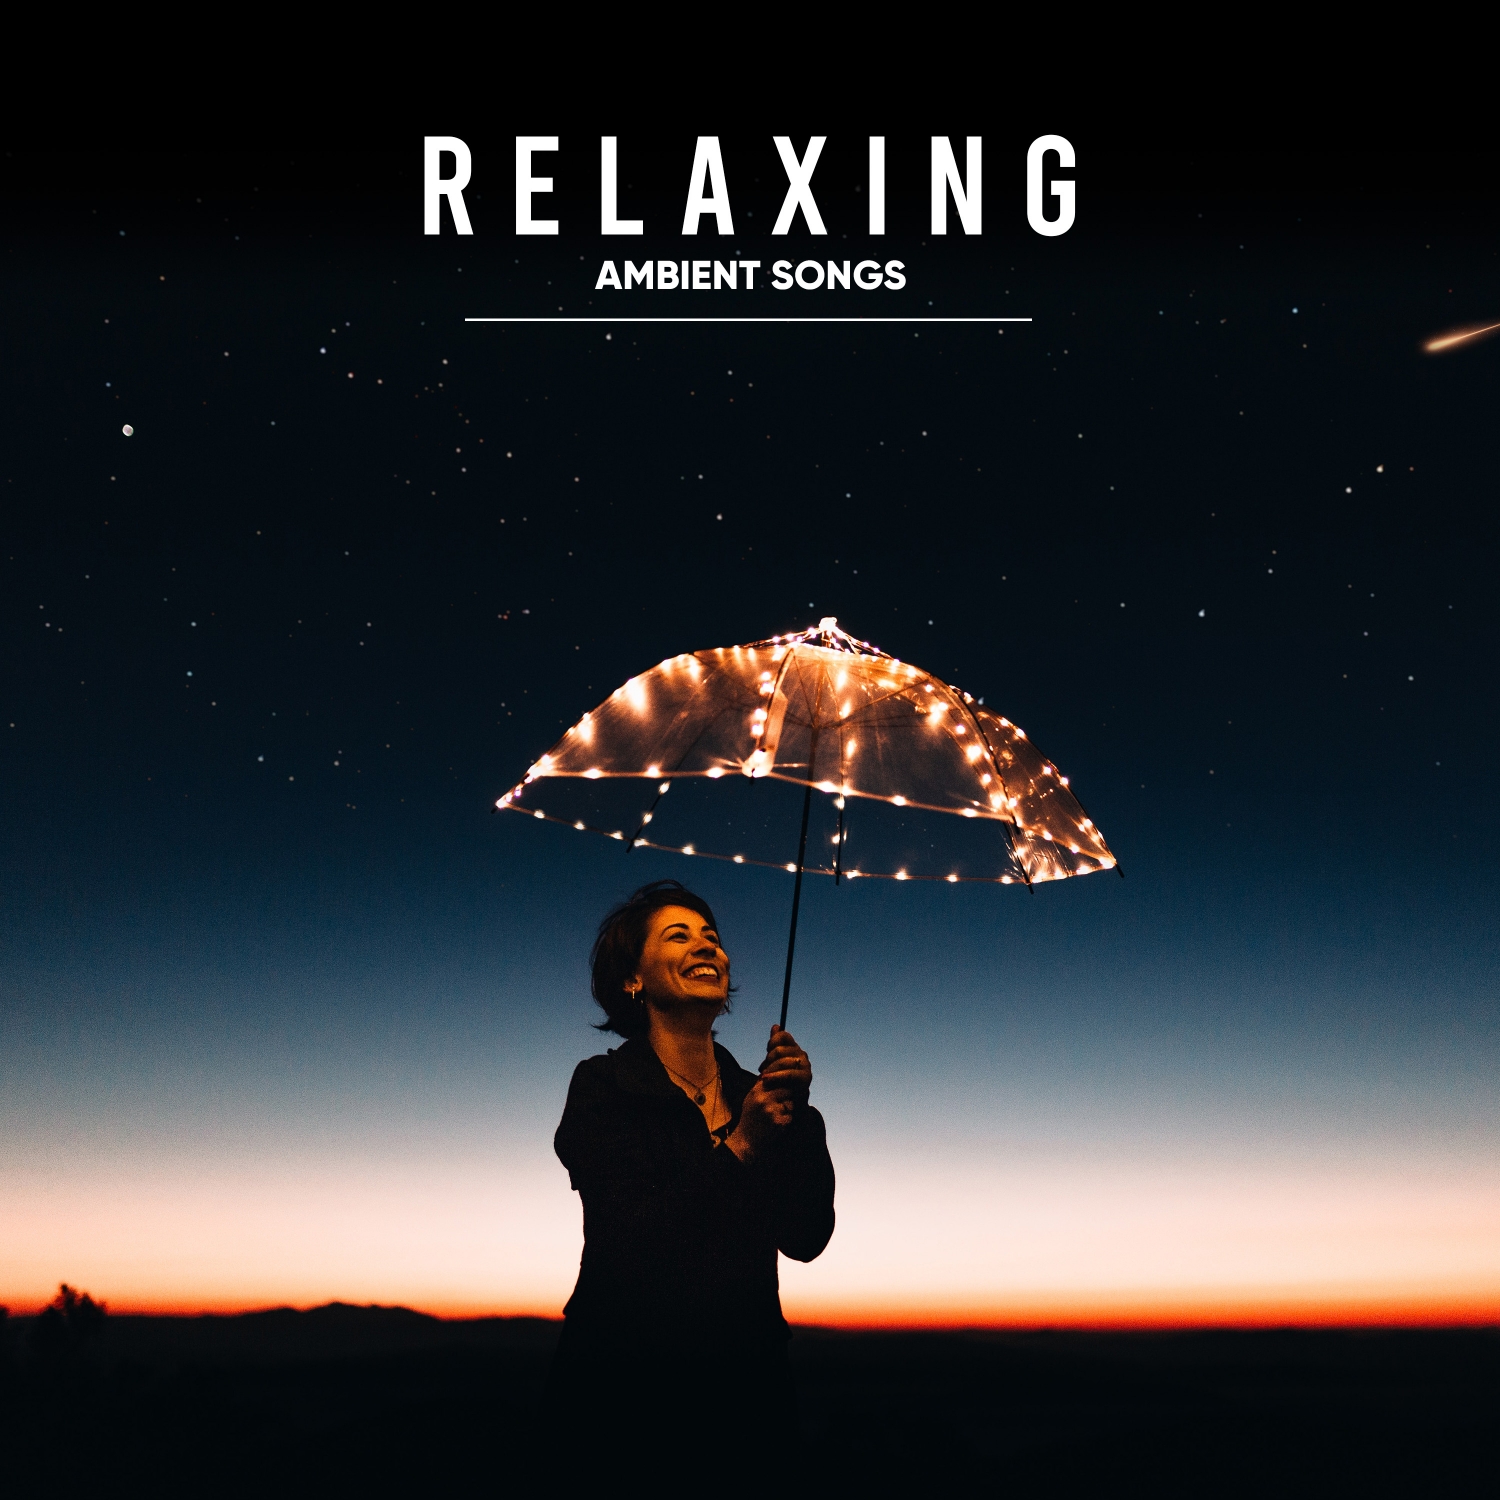 14 Relaxing, Ambient Songs to Provide Focus